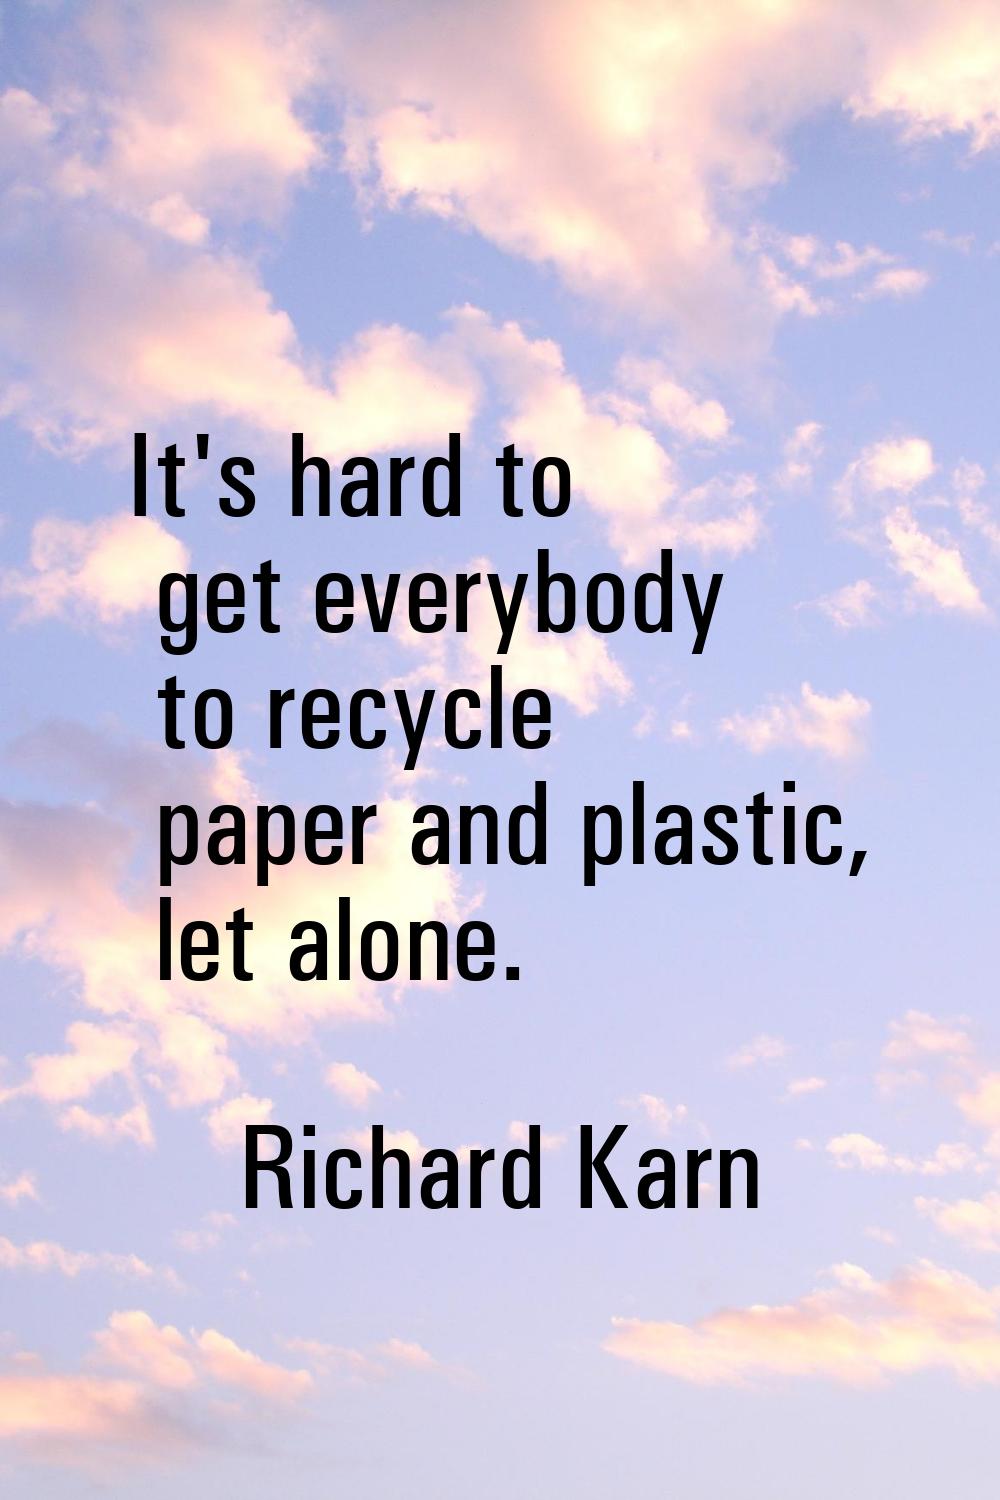 It's hard to get everybody to recycle paper and plastic, let alone.